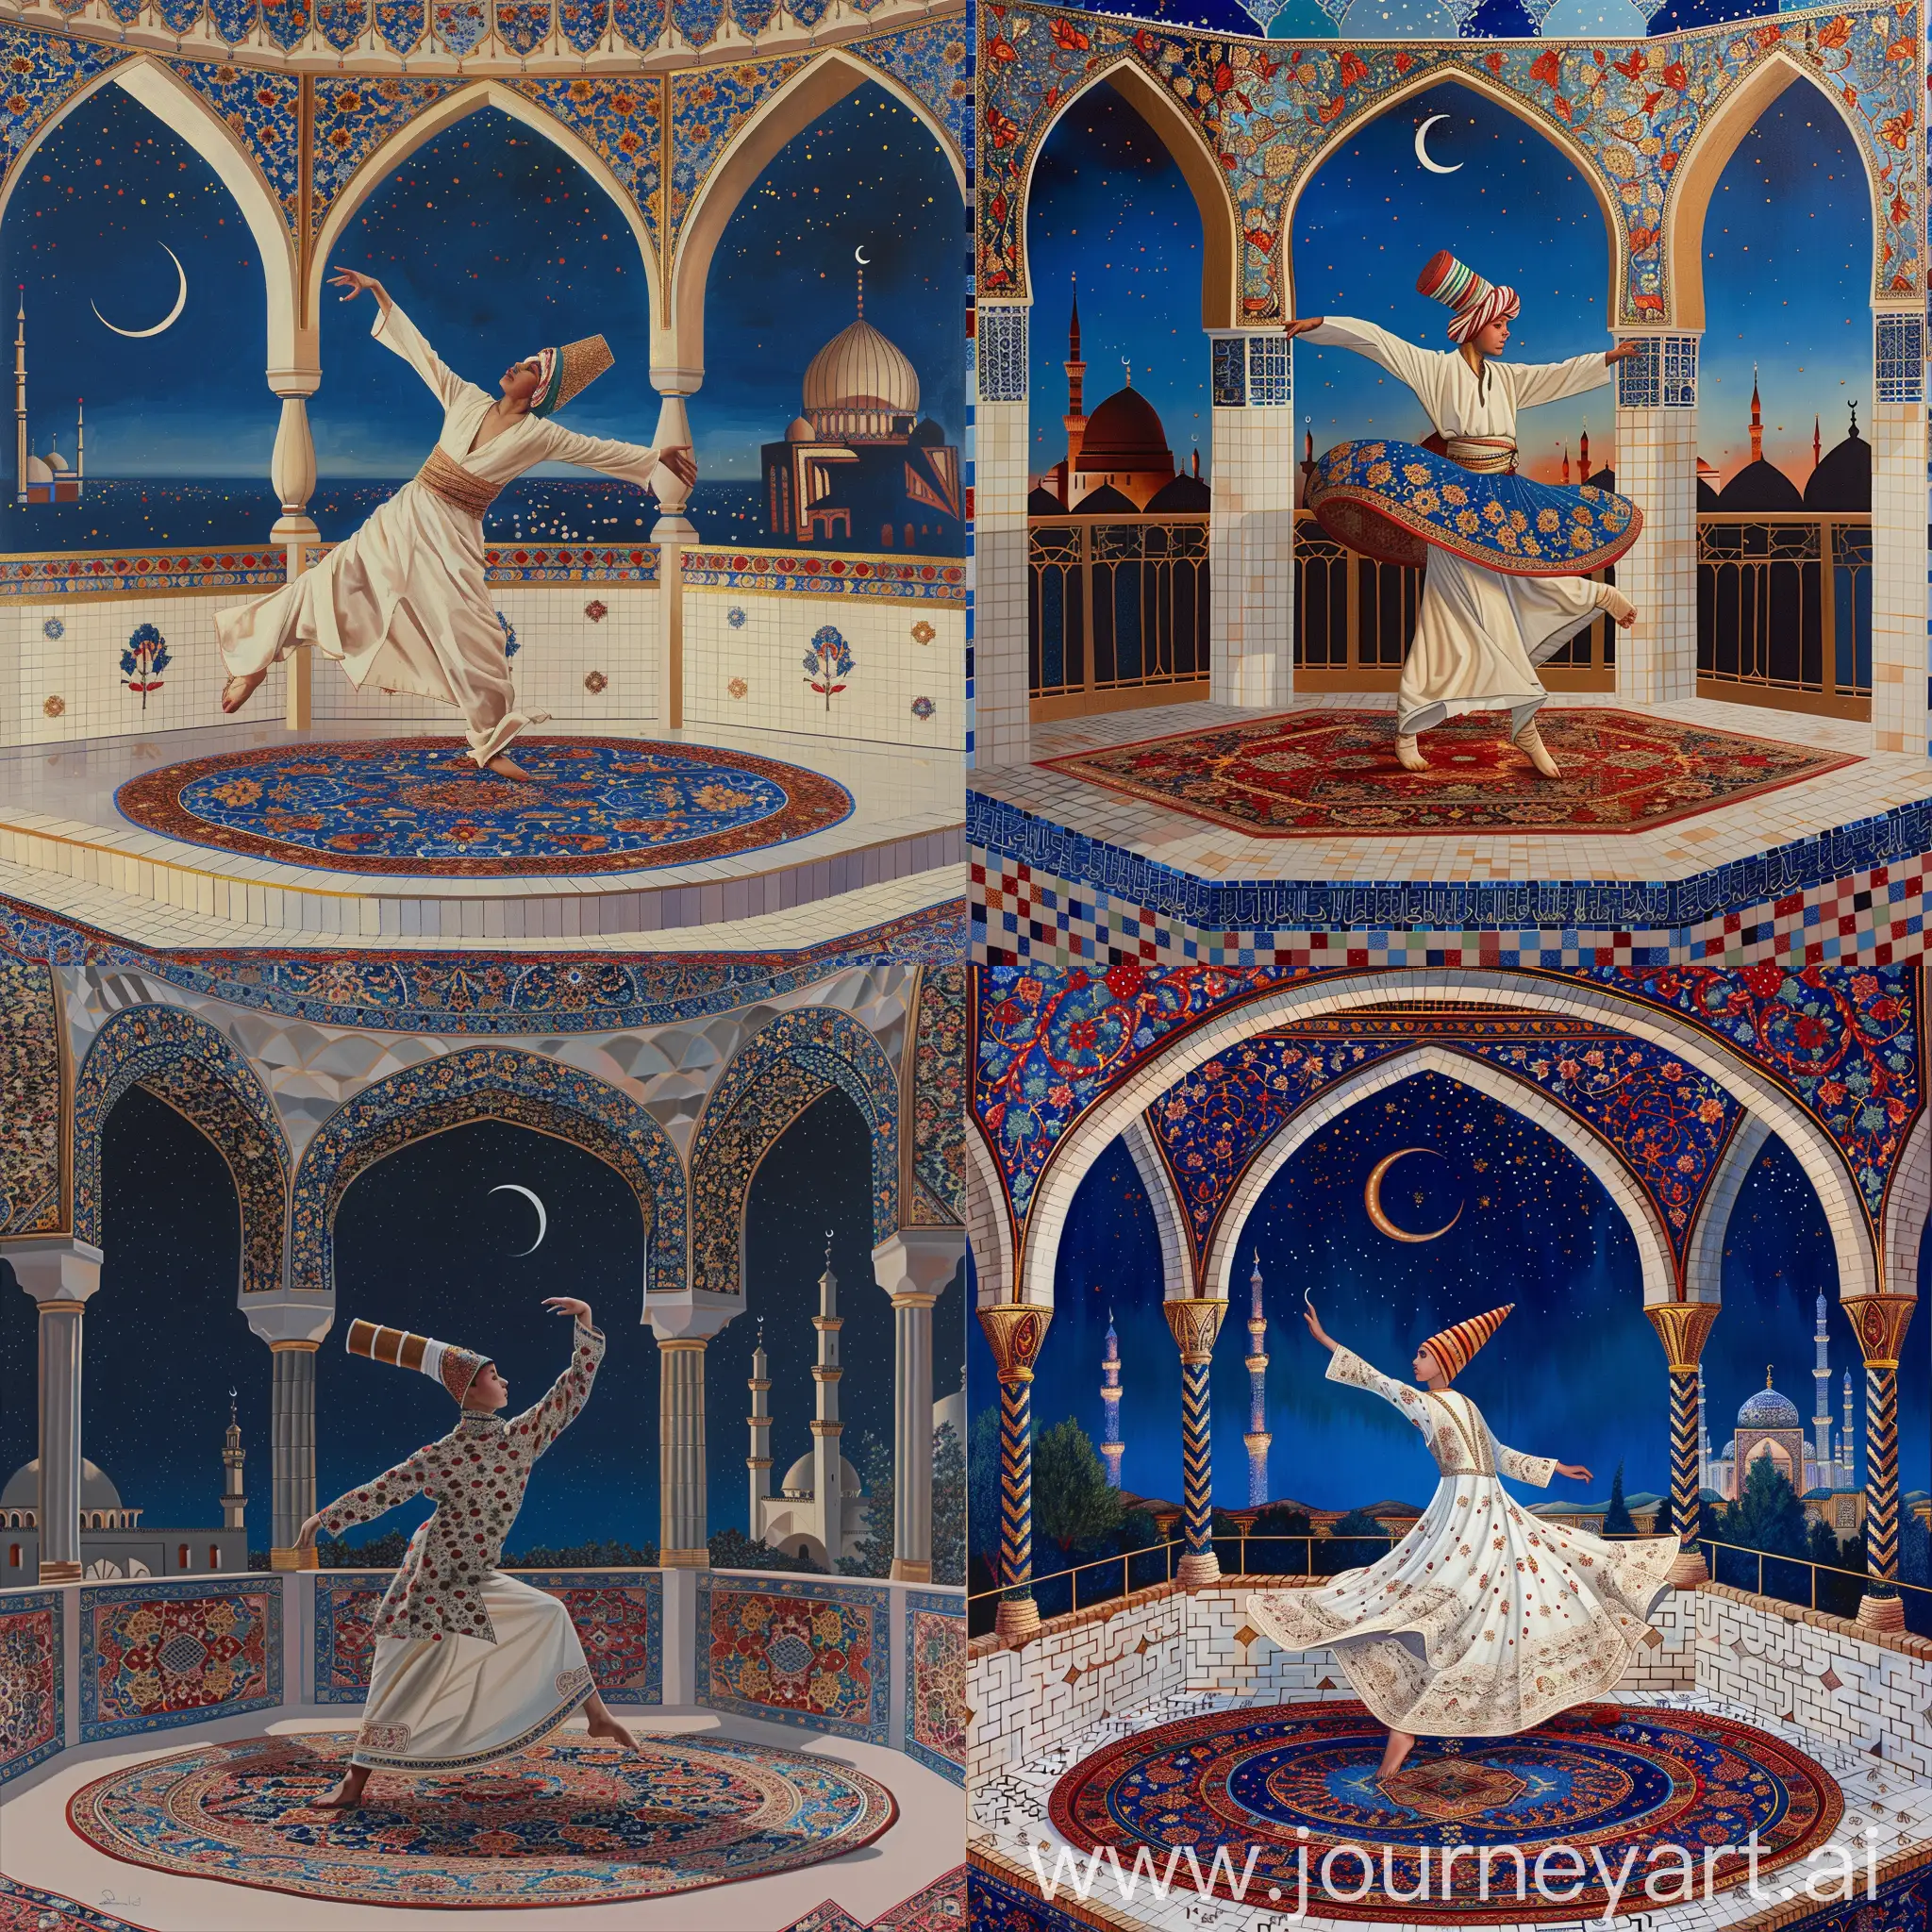 A young British dervish wearing cylindrical fez cap performing sufi whirling sema dance on a persian carpet, inside an octagonal balcony having three arches decorated with red blue gold persian floral motifs, serene night sky with a crescent, view of Persian tiled mosque, White blue red golden composition --sref https://cdn.discordapp.com/attachments/1213041174428782623/1246562622023667812/IMG_20240326_220808.png?ex=665d8029&is=665c2ea9&hm=81116a923e48e05e6dec61f955e335f3545c7d1b684e25425125fecf09b3a8e1& --sw 999 --style raw --q 1 --s 999 --ar 2:3